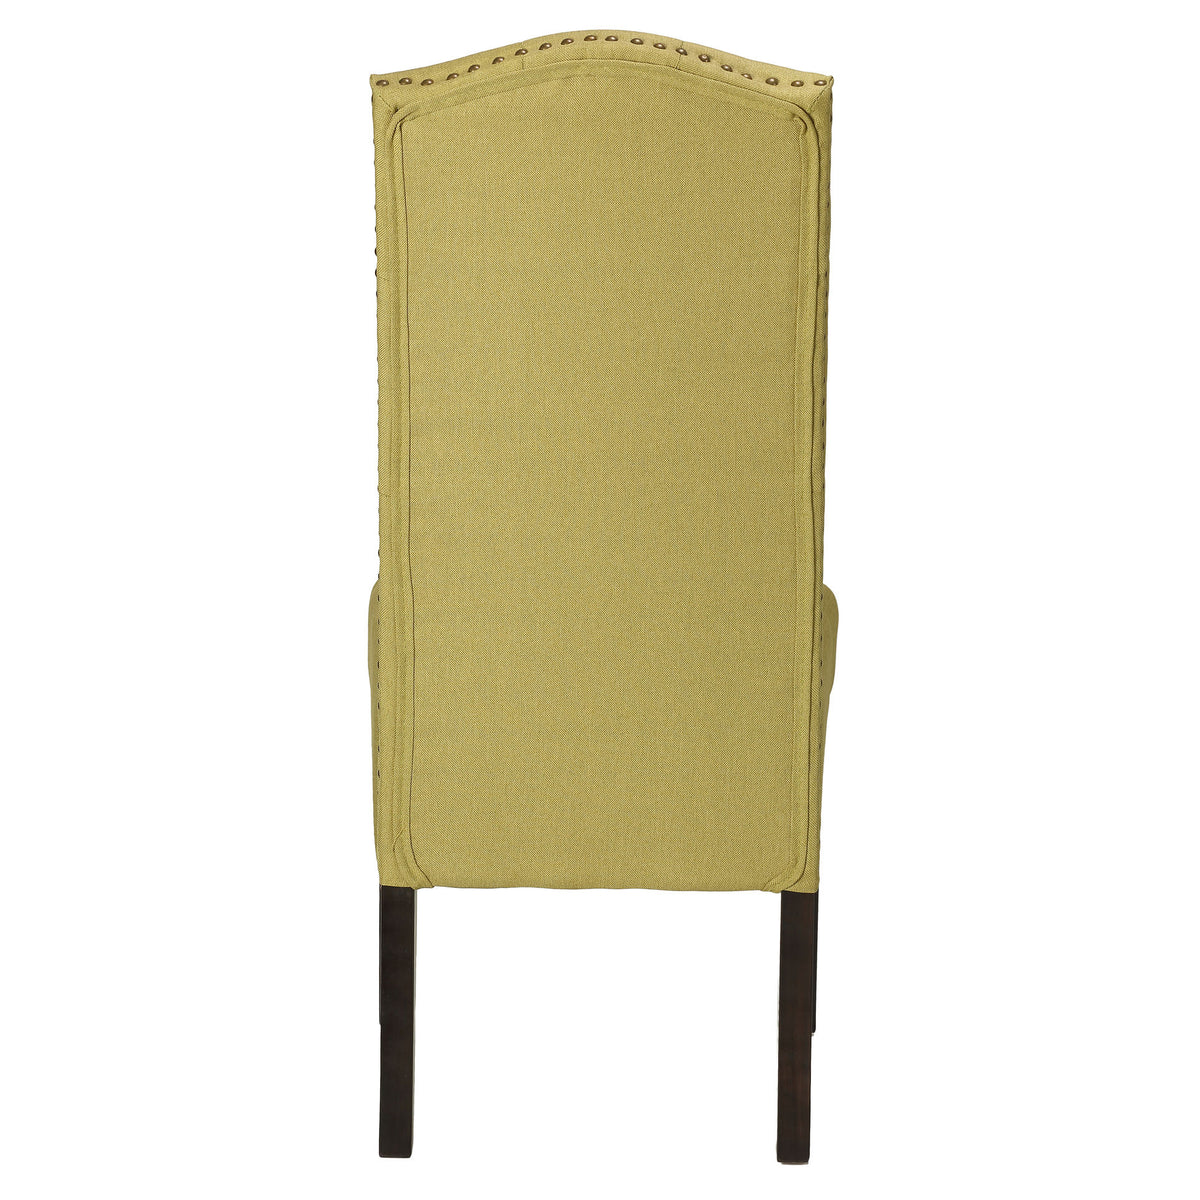 Cortesi Home Perri Camelback Dining Chair in Citron Green Linen (Set of 2)